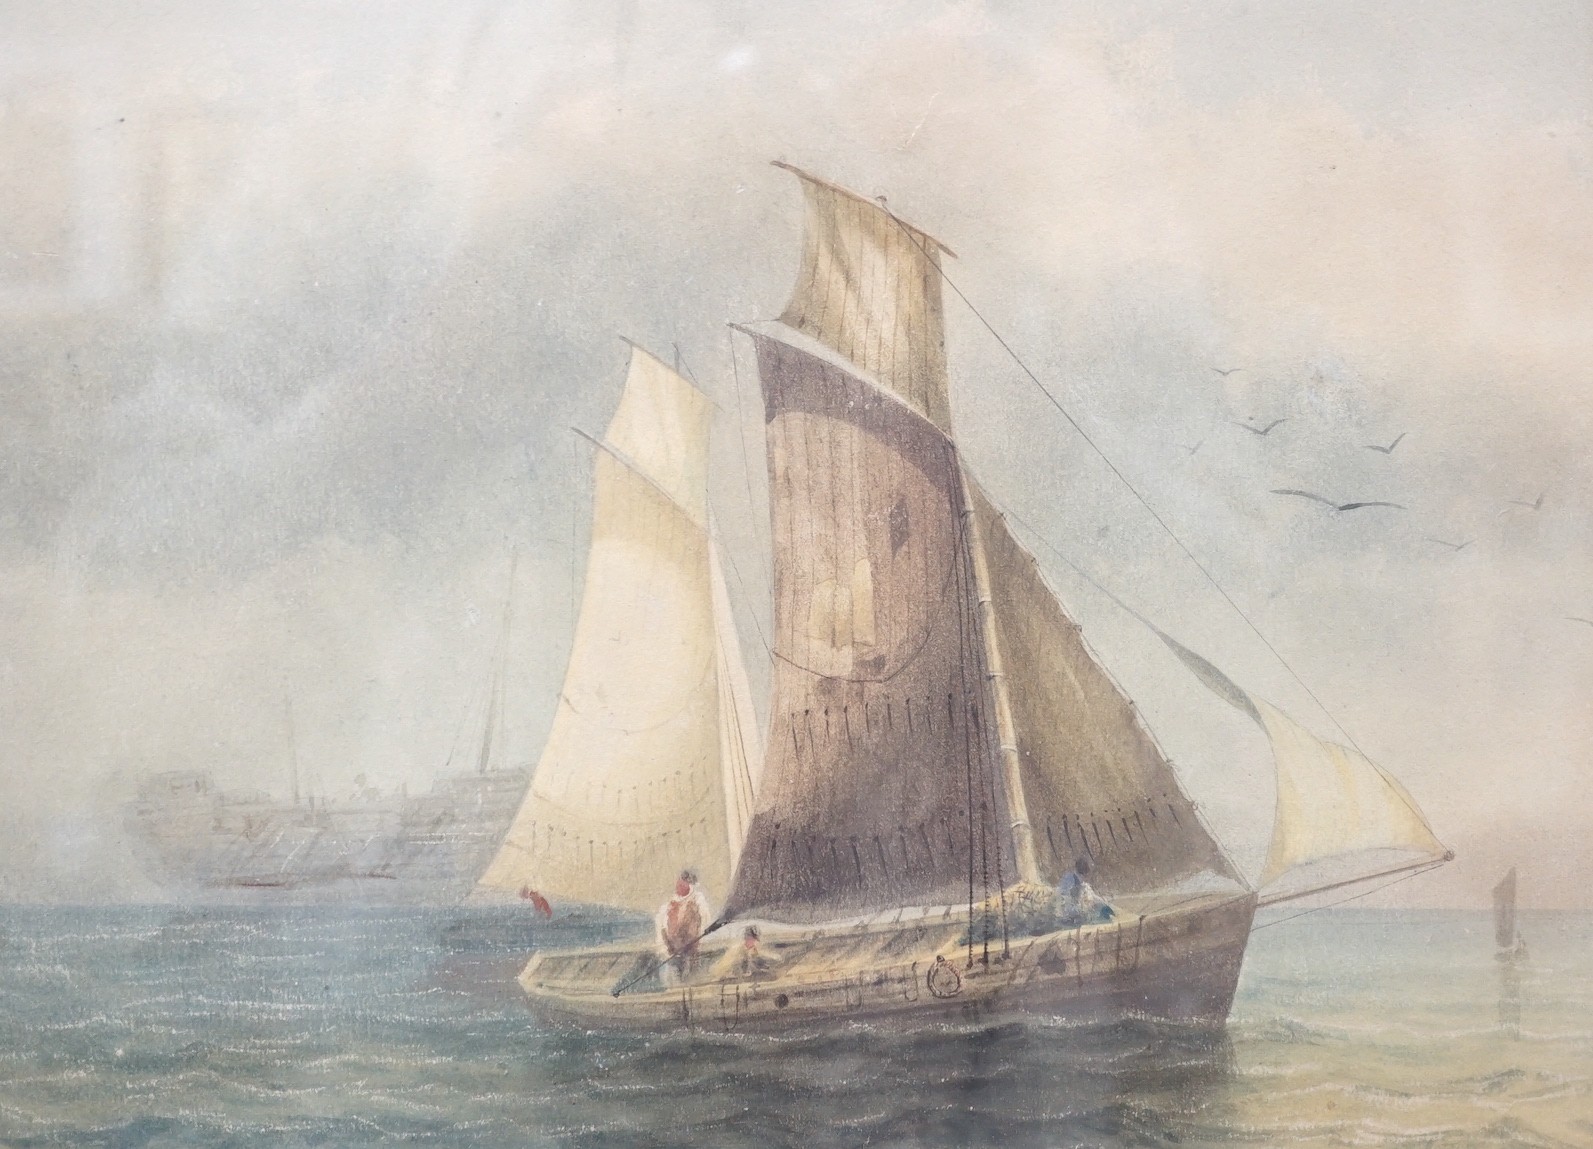 Attributed to William Roxby Beverley (1811-1889), watercolour, Fishing boat and hulk off the coast, 22 x 30cm